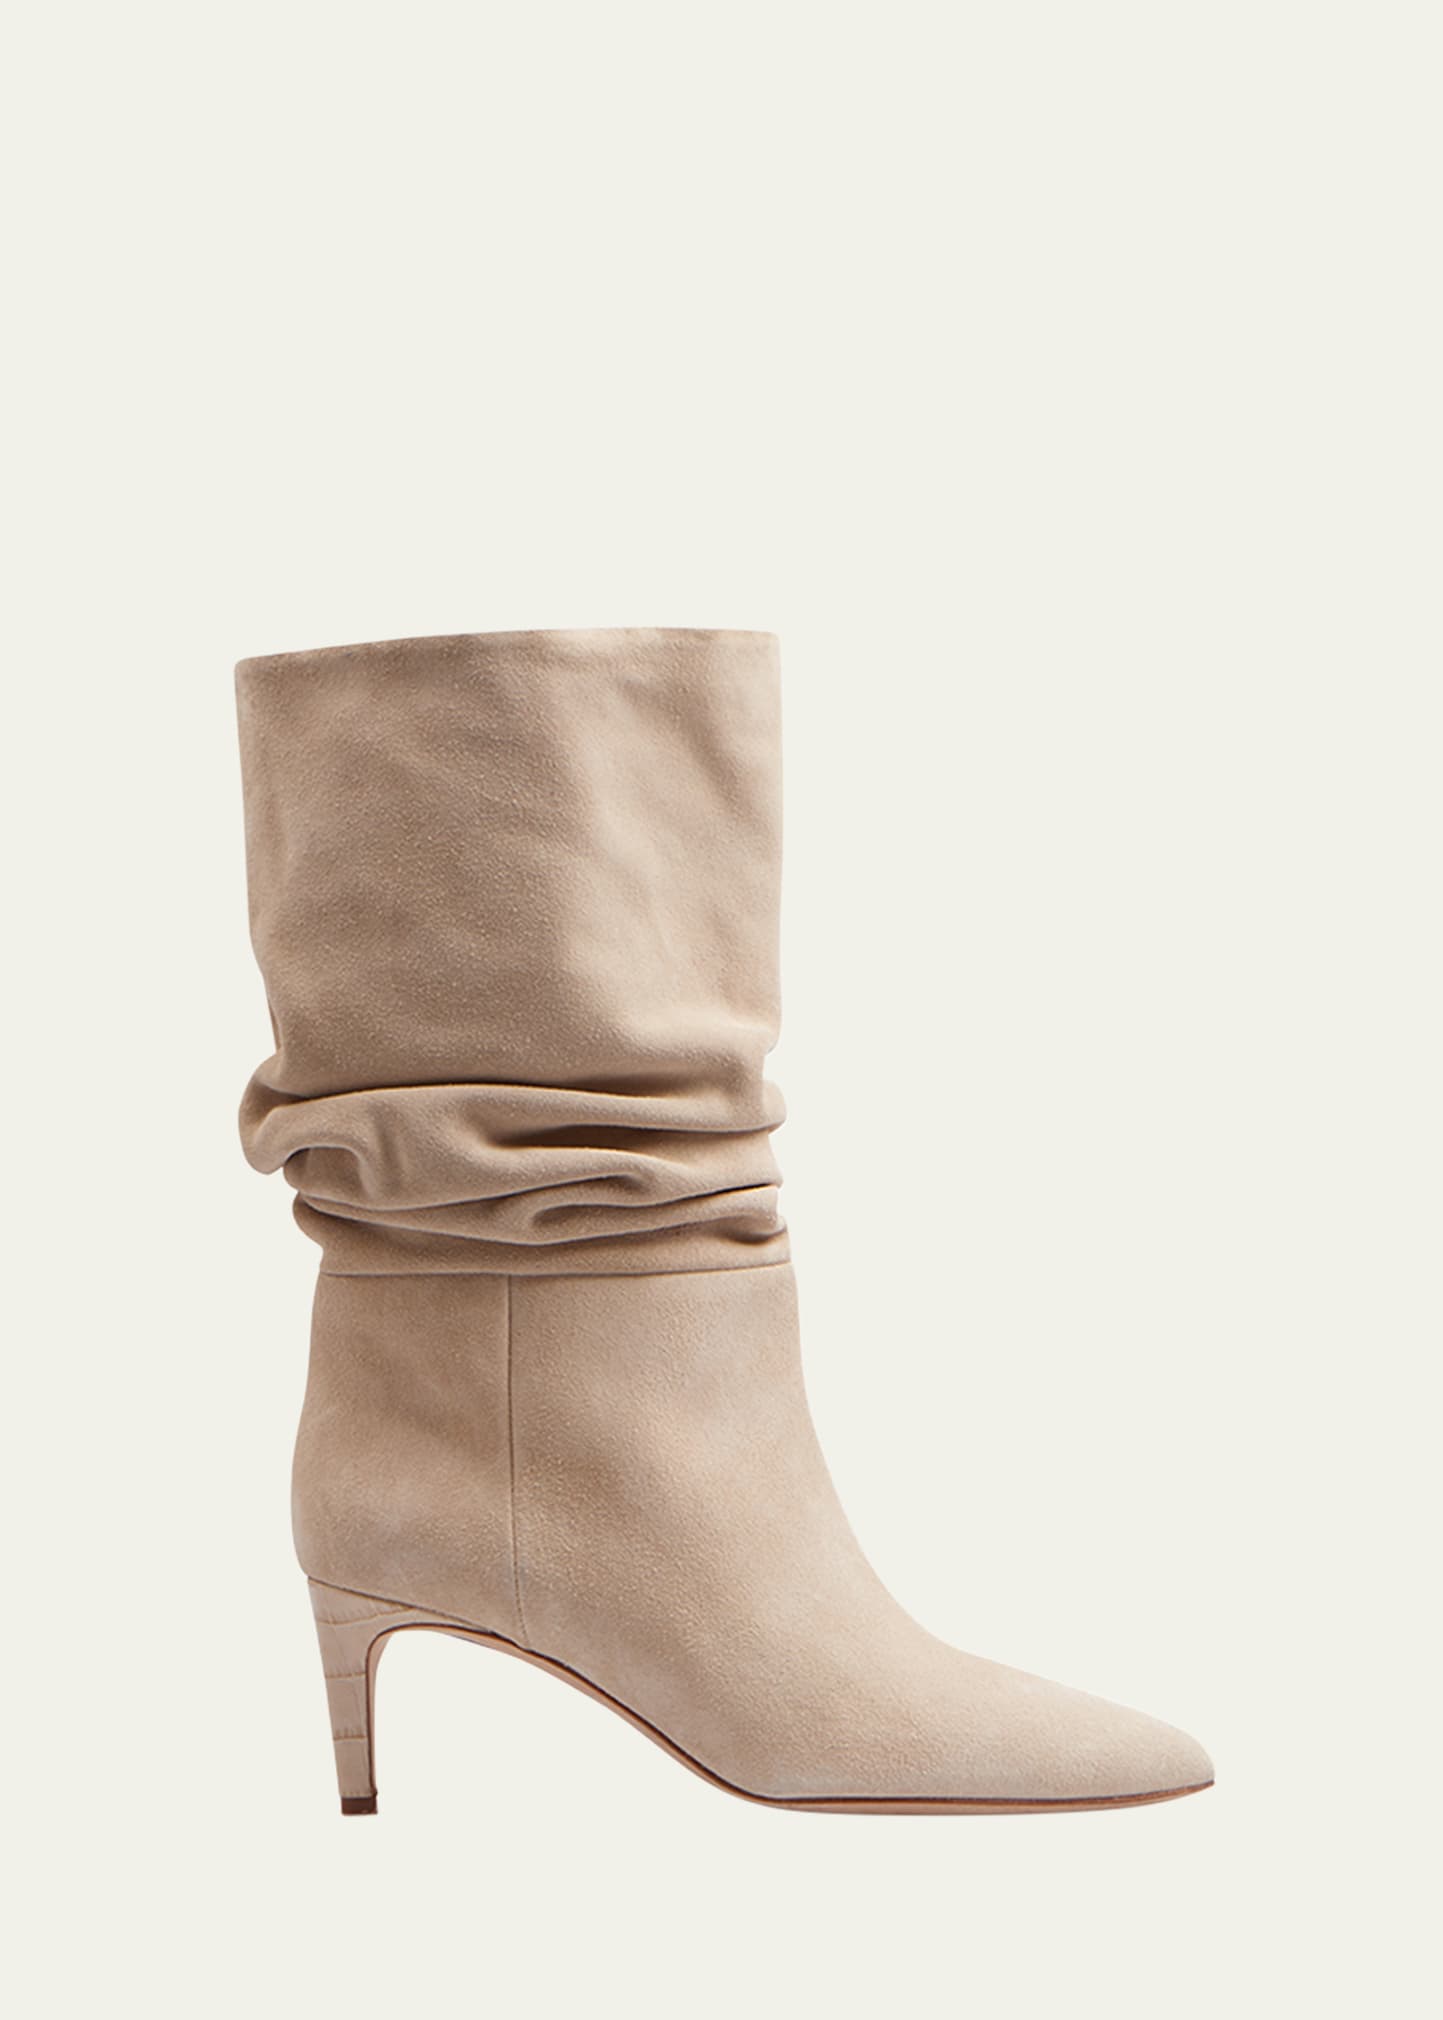 Paris Texas 60mm Slouchy Suede Boots In Angora